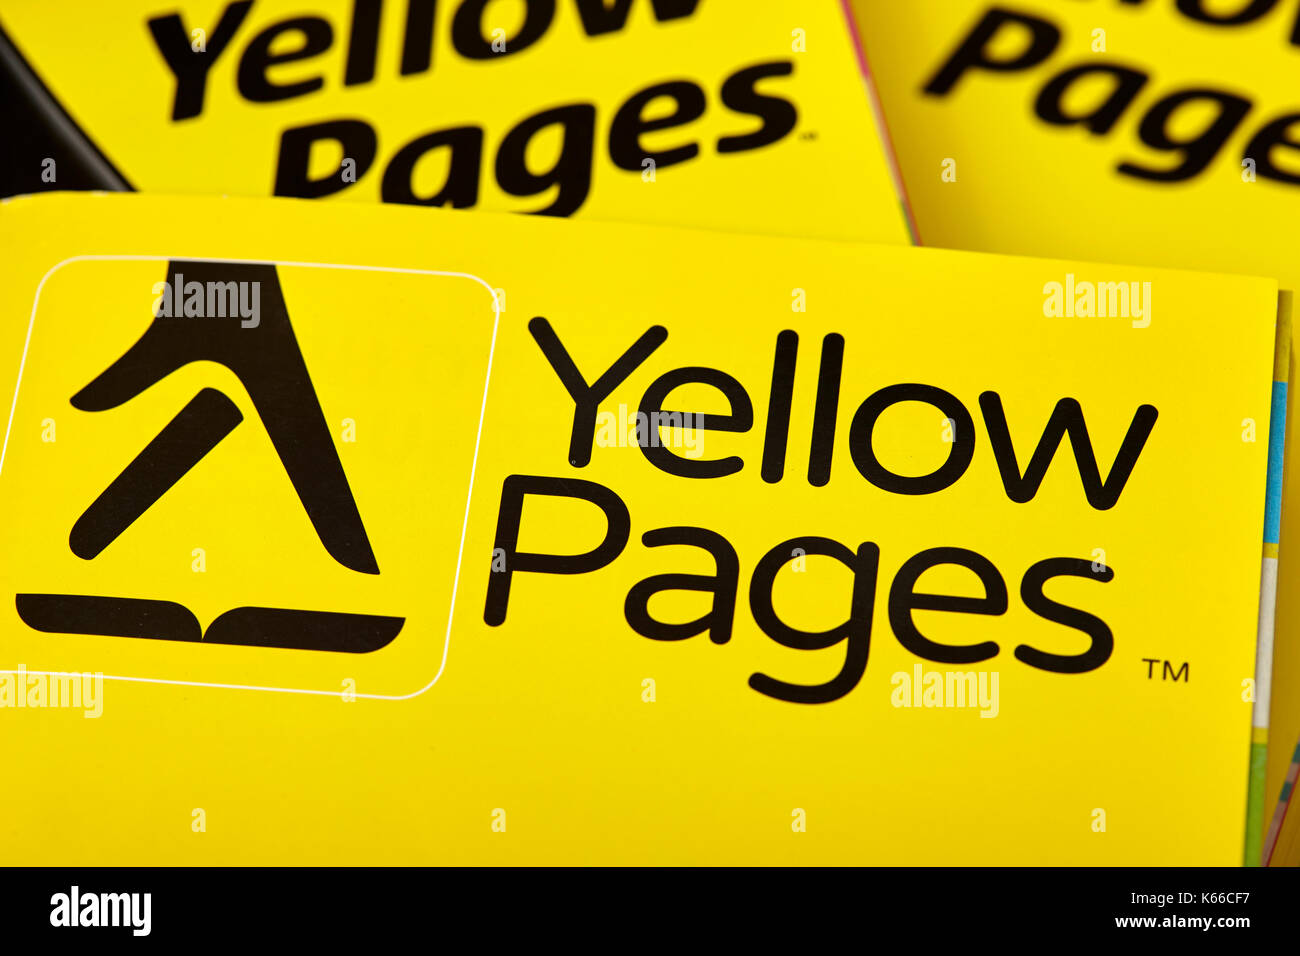 yellow pages classified telephone directory paper edition uk Stock Photo